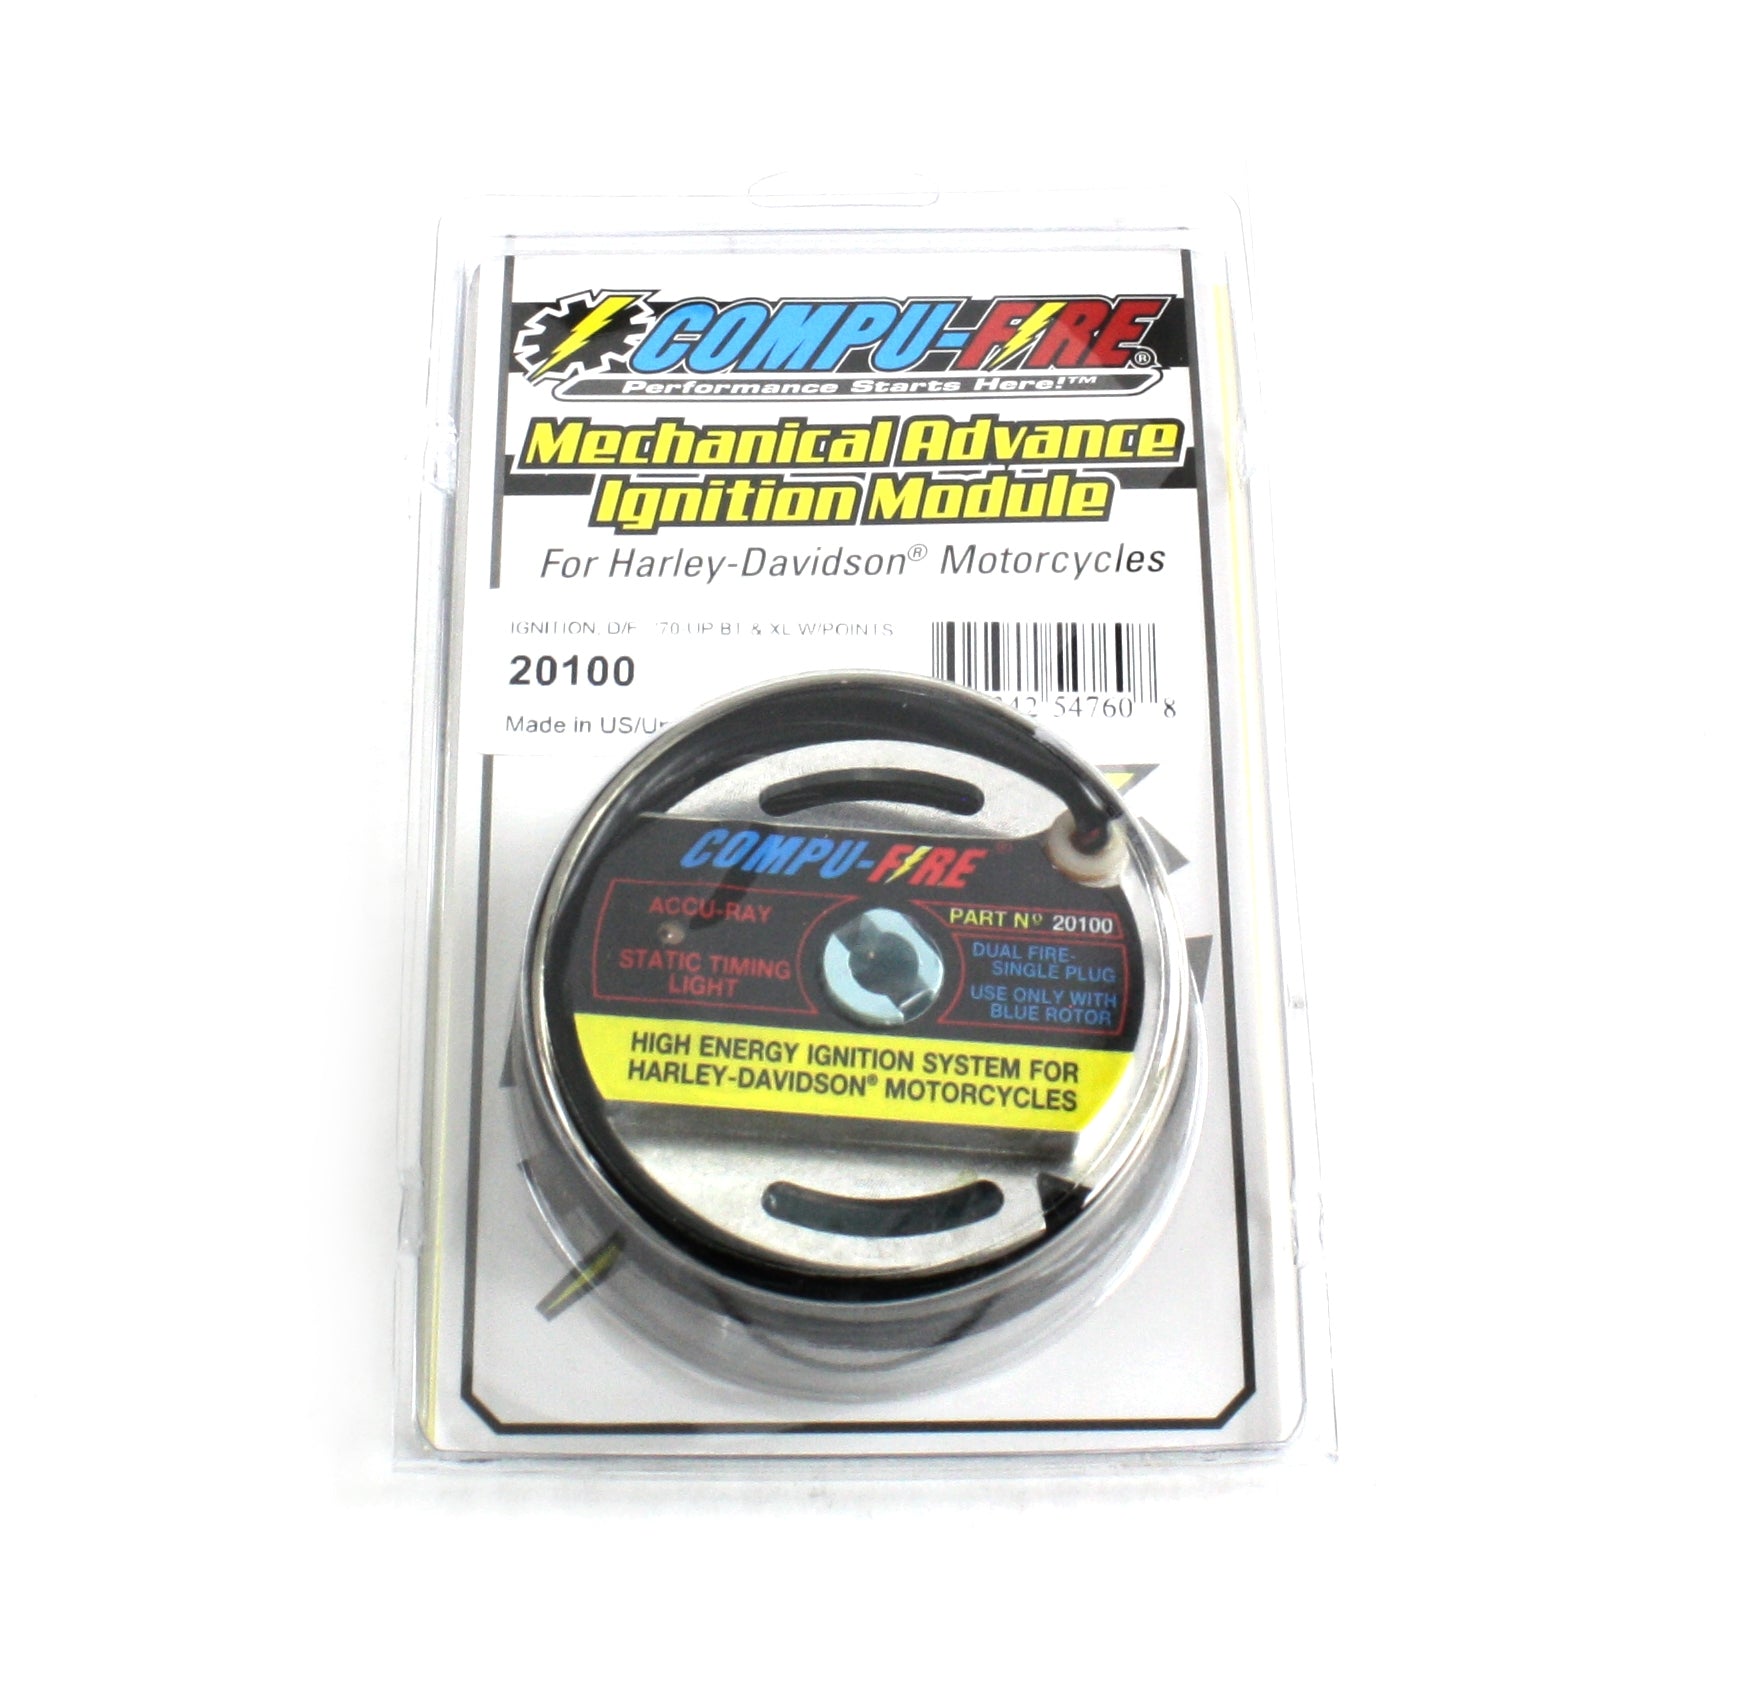 Compu-Fire 20100 - Dual Fire Mechanical Advance Ignition Module (Replaces Points) for 70 and Up Big Twin &amp; Sportster&reg; Harley&reg; Models